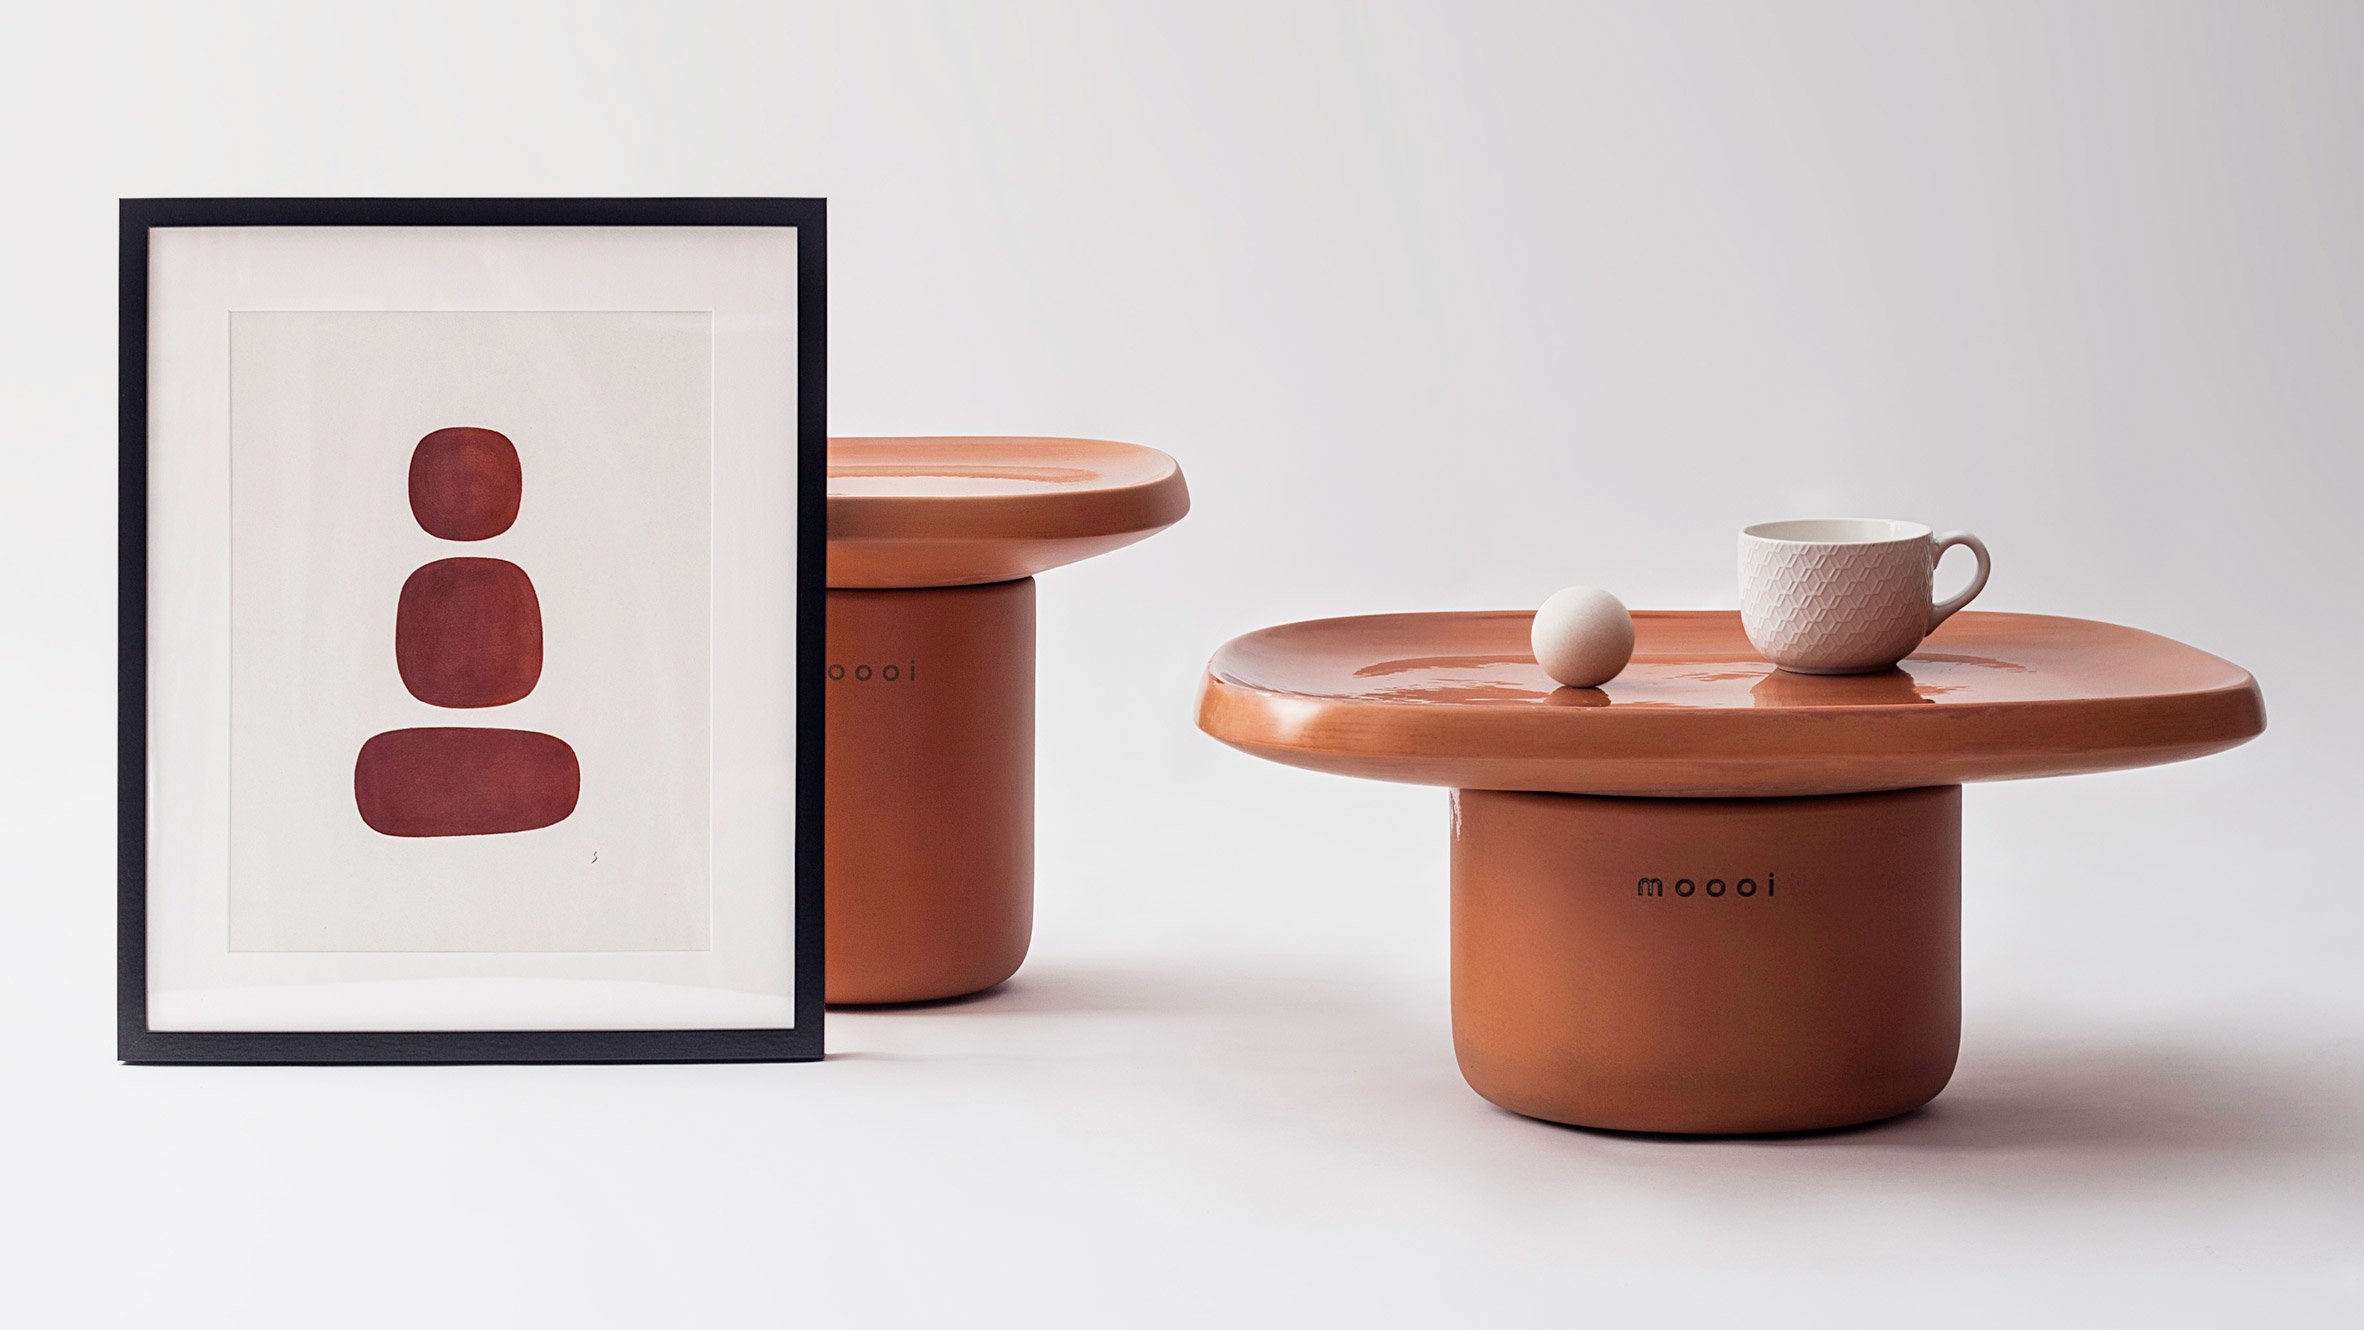 The Obon tables designed by Simone Bonanni for Moooi are inspired by the ancient beauty of terracotta. Photo c/o Moooi.